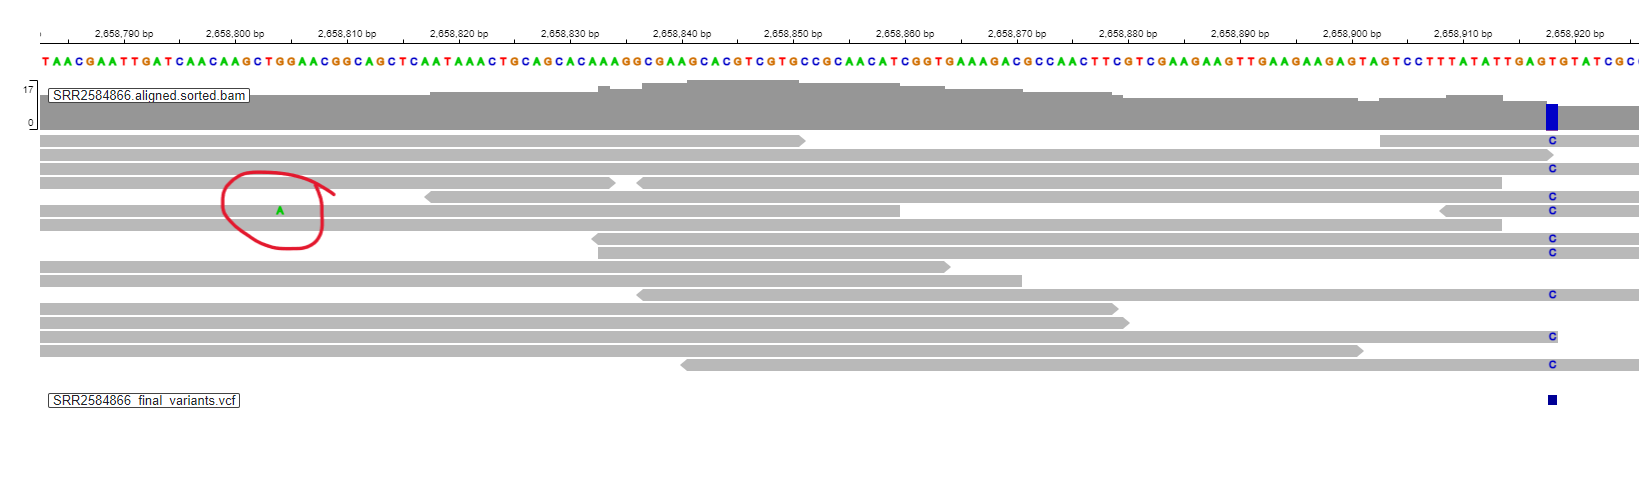 IGV web app with reference genome, read alignment and variant data loaded